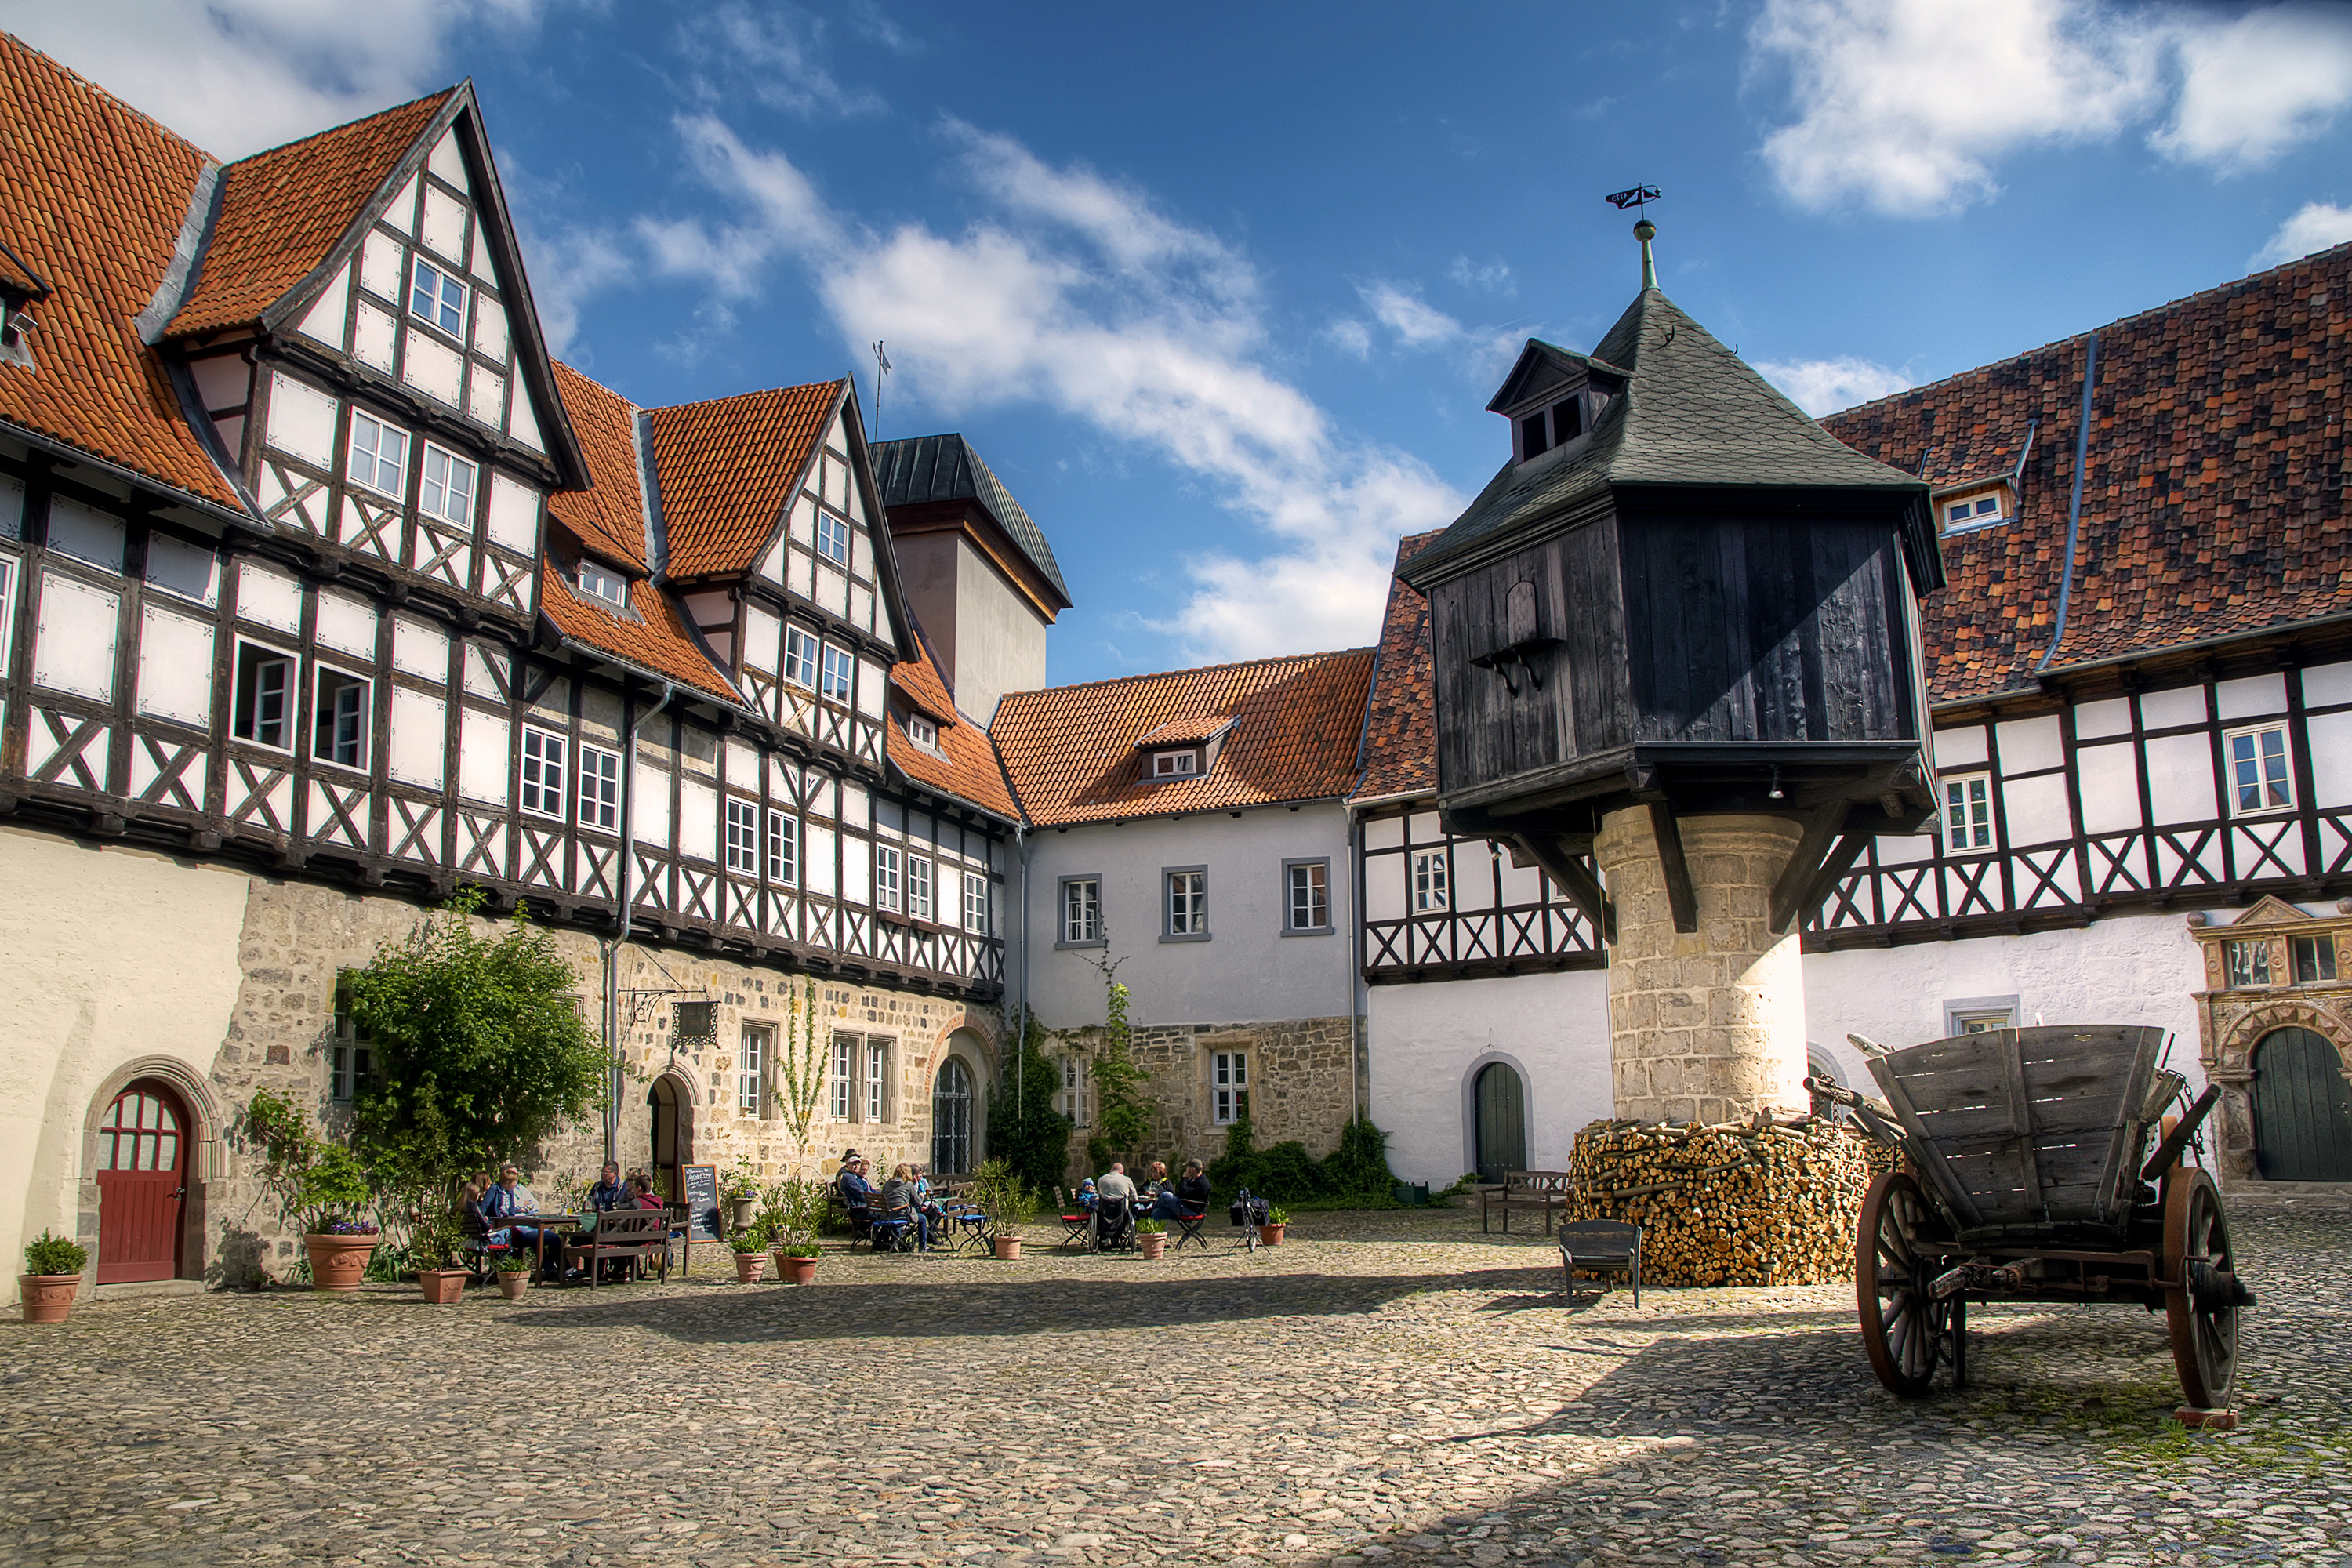 Alternative Places to Visit in Germany